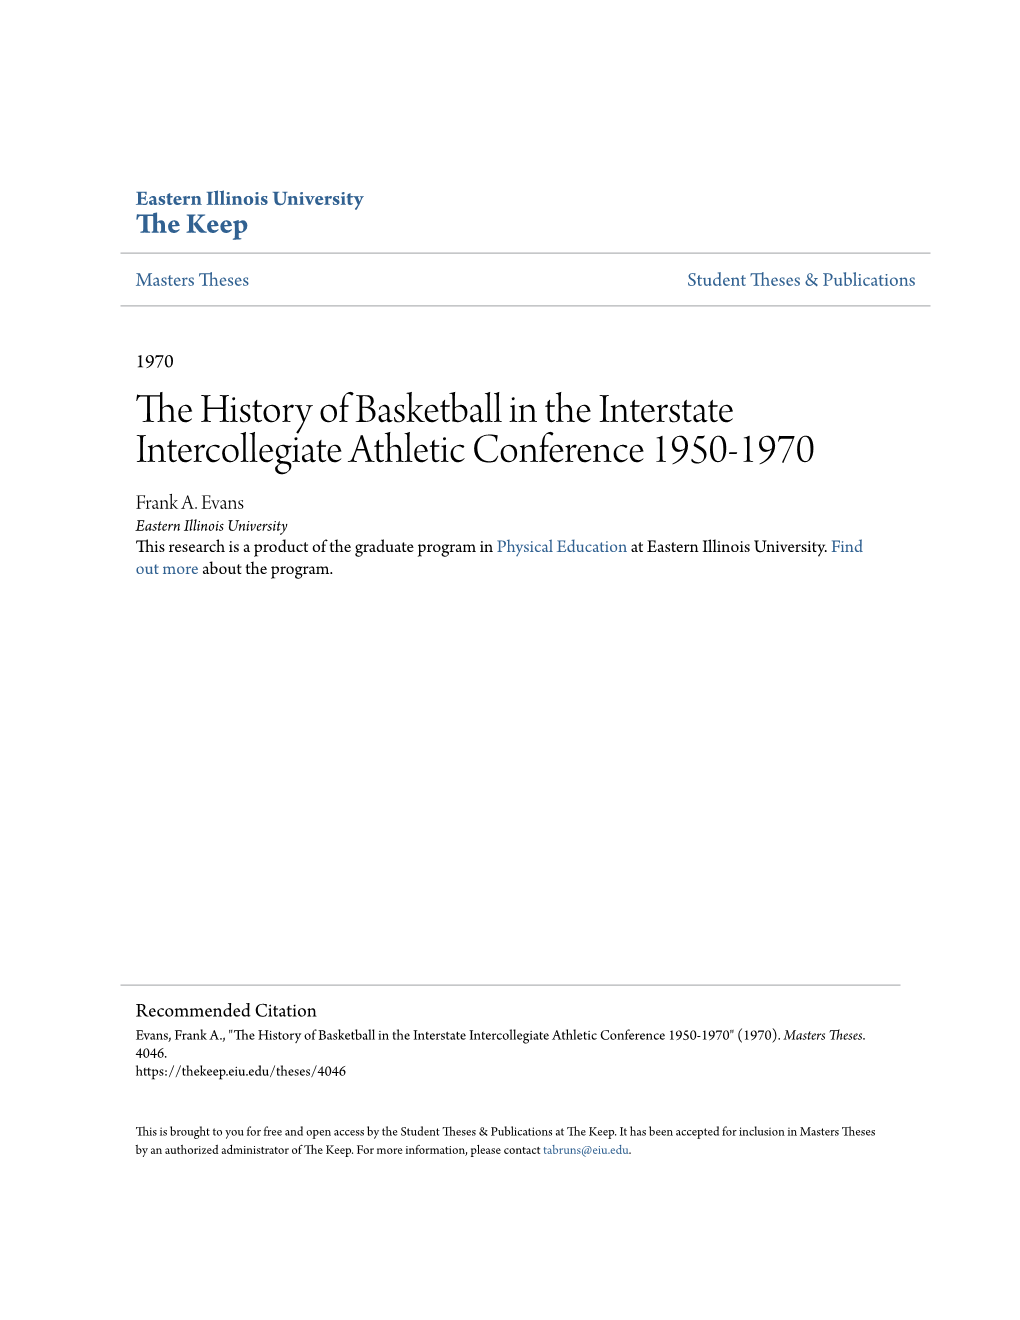 The History of Basketball in the Interstate Intercollegiate Athletic